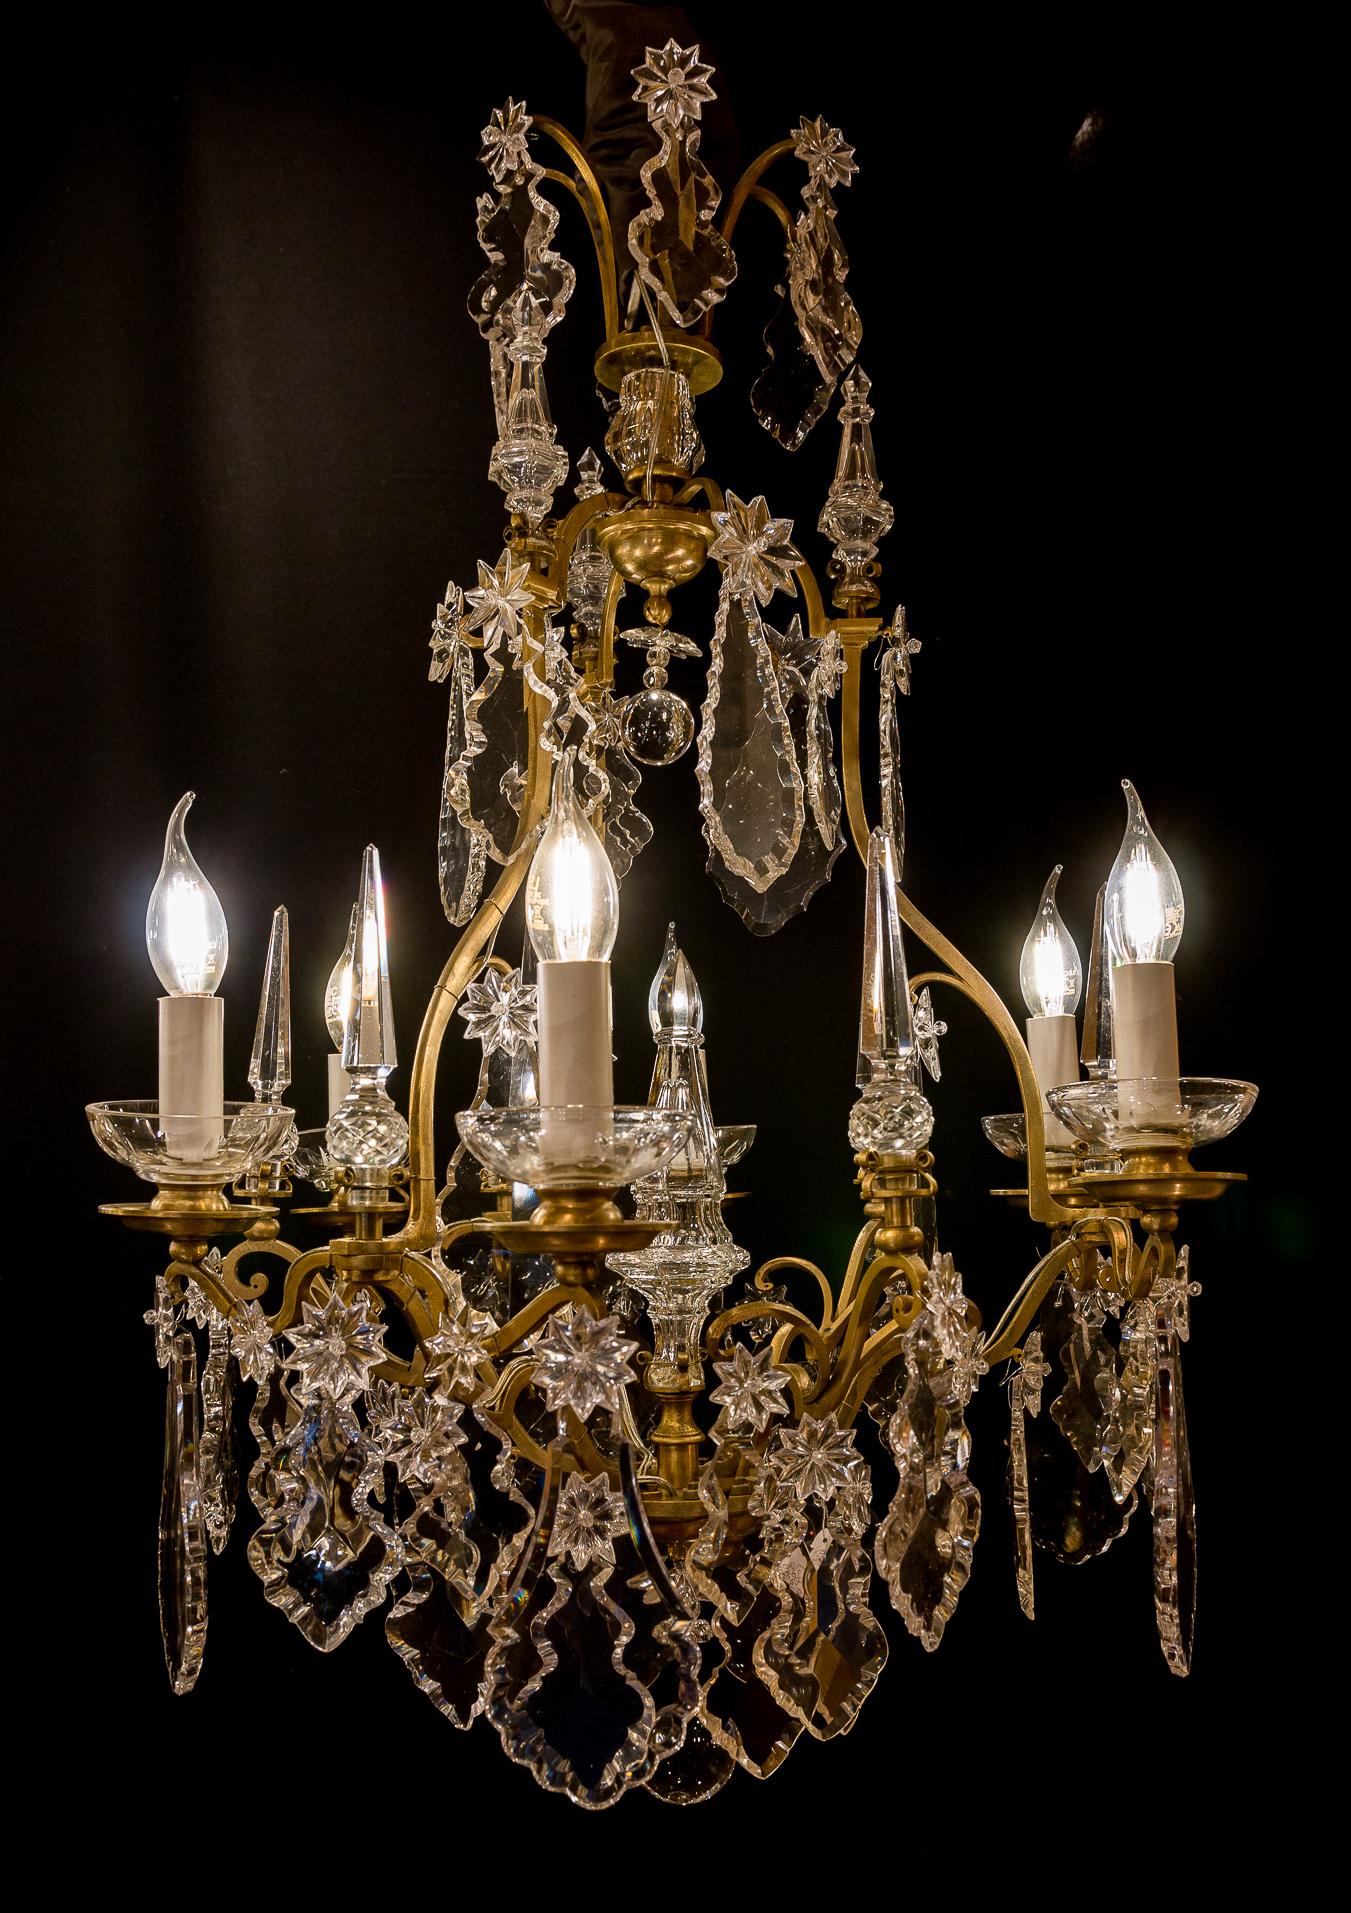 French Louis XV style, gilt bronze and crystal chandelier, circa 1900-1920.

Lovely gilt bronze and cut crystal chandelier in the Classic French Louis XV style.
Our chandelier is composed of six perimeter arm-lights.
Excellent quality white